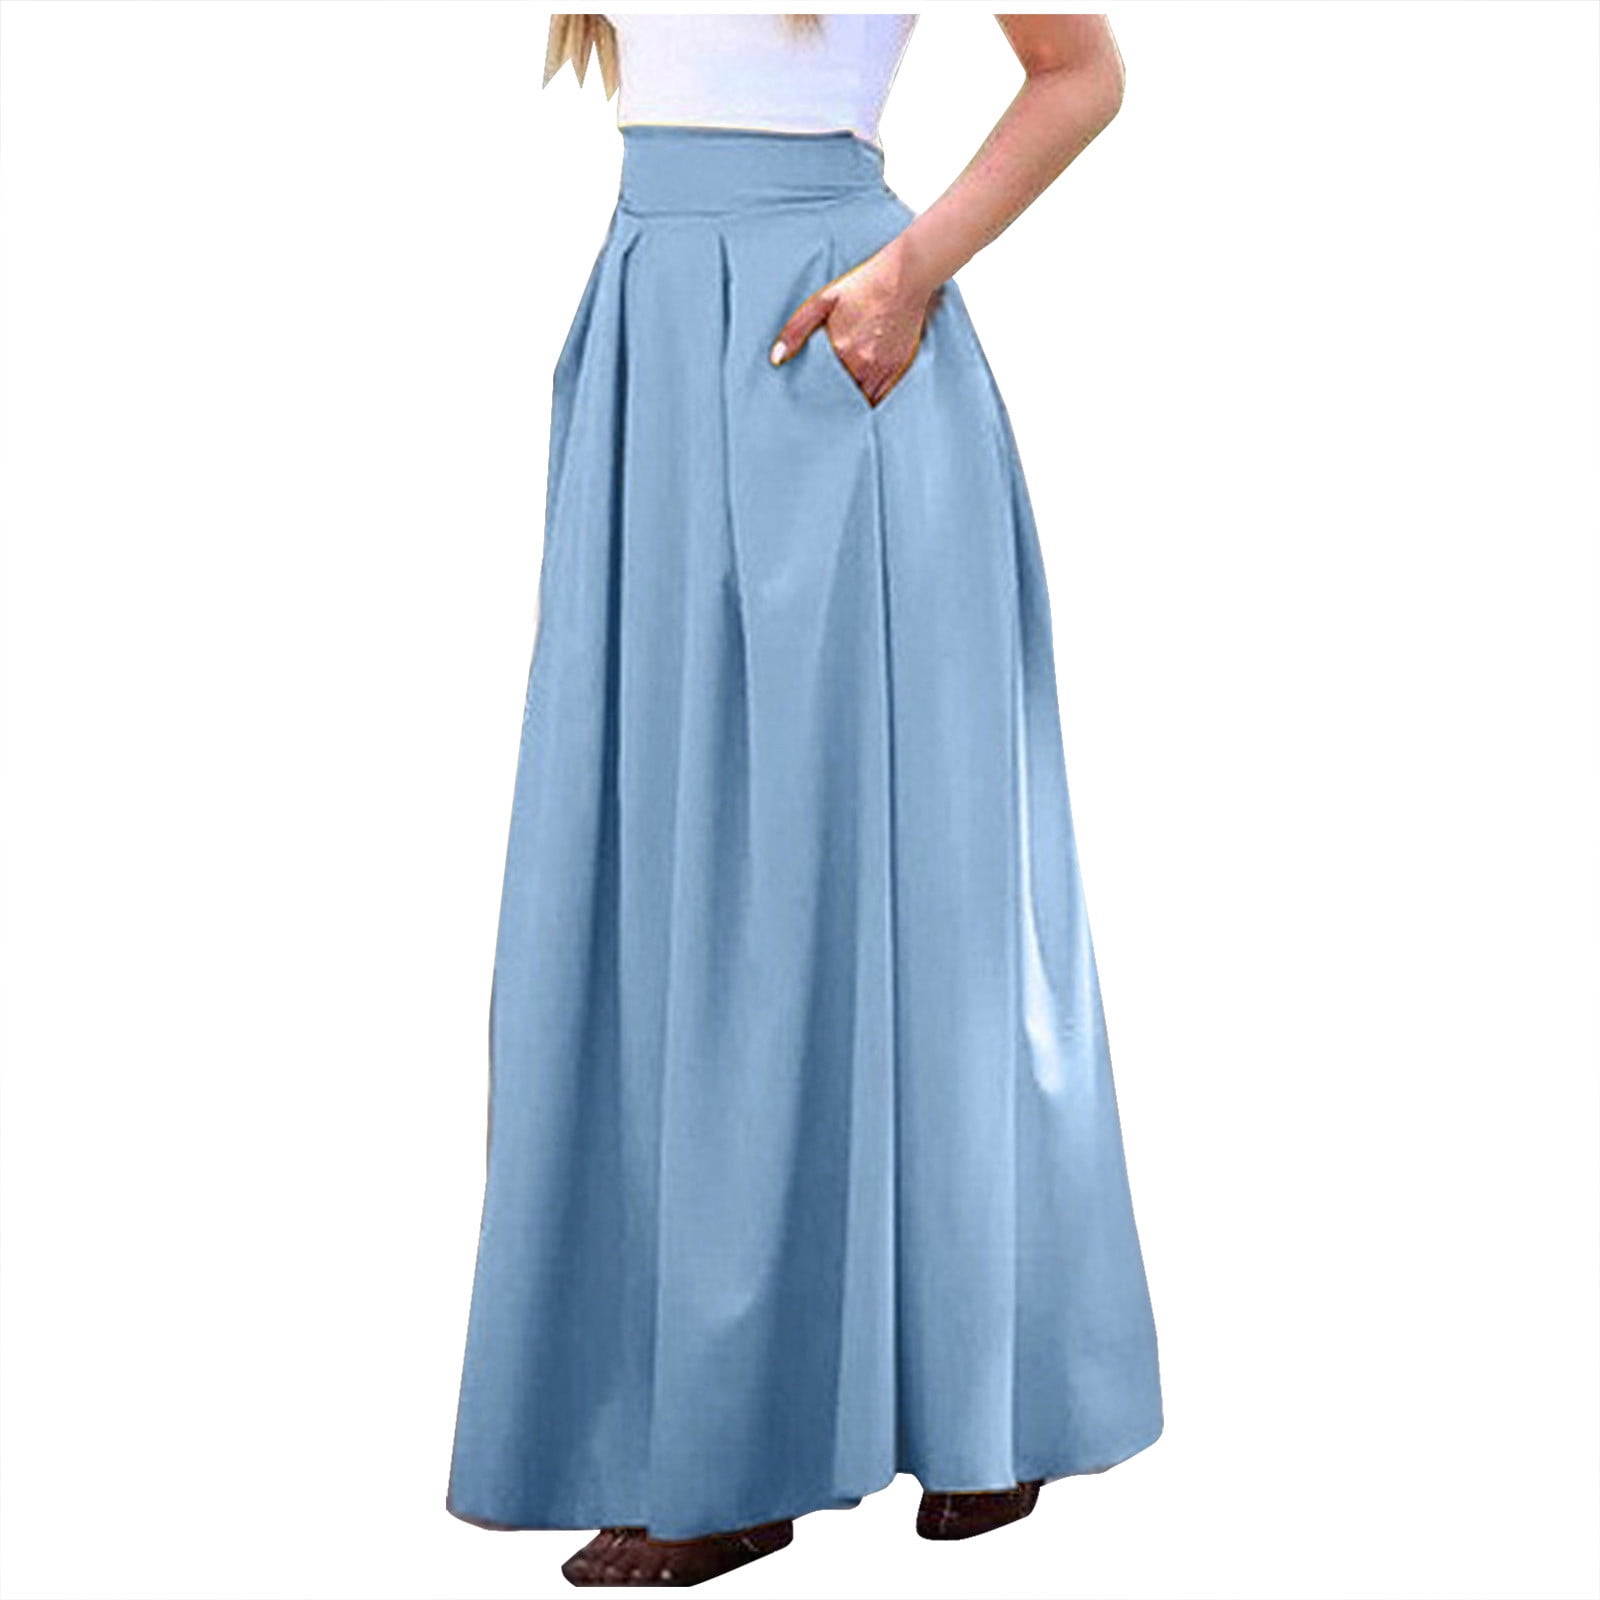 Women's High Waisted Long Skirt Solid Color Casual Pleated A-Line Flowy  Spring Summer Maxi Skirt with Pockets 